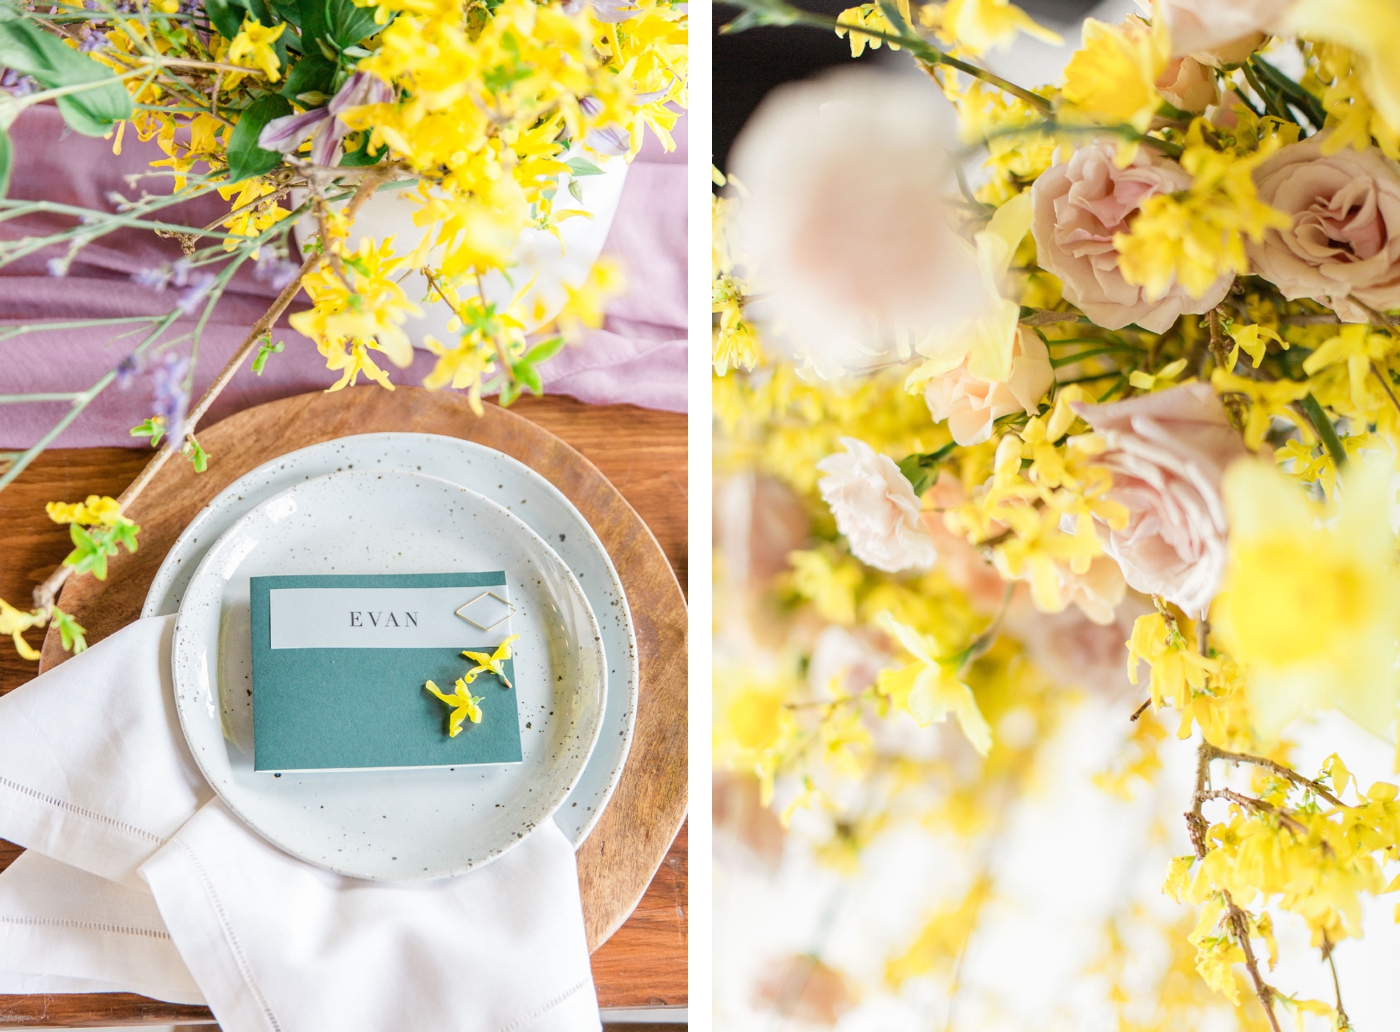 Yellow and lavender wedding flowers by Pistil and Pollen - Photography by Laura Rose Photography | Verve Event Co.